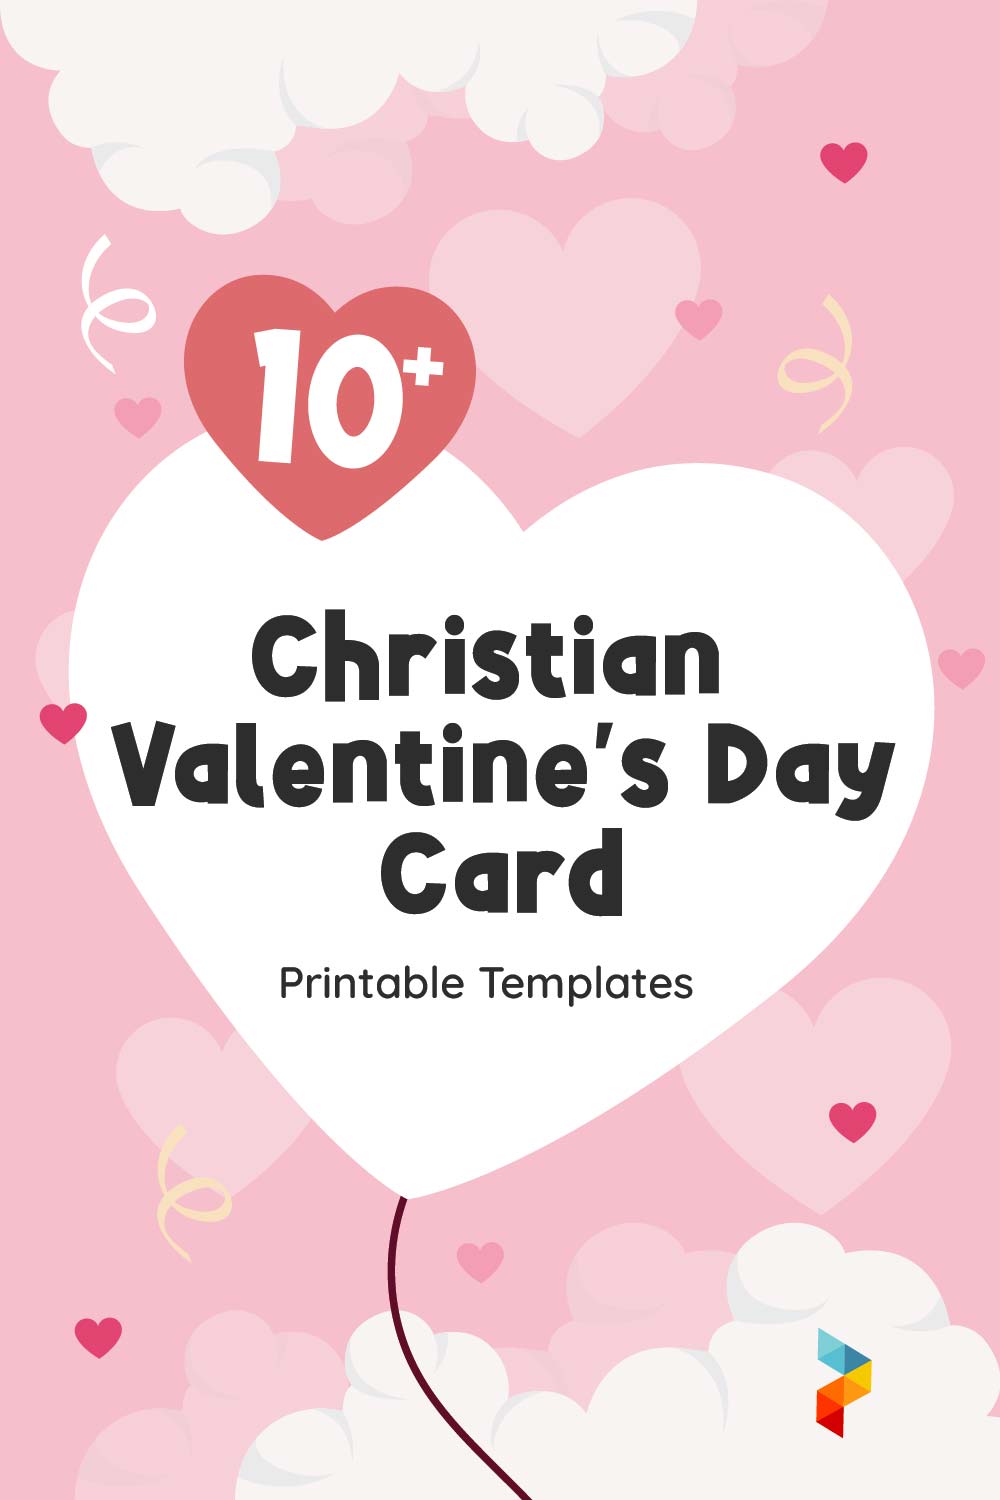 Christian Valentine's Day Card Templates